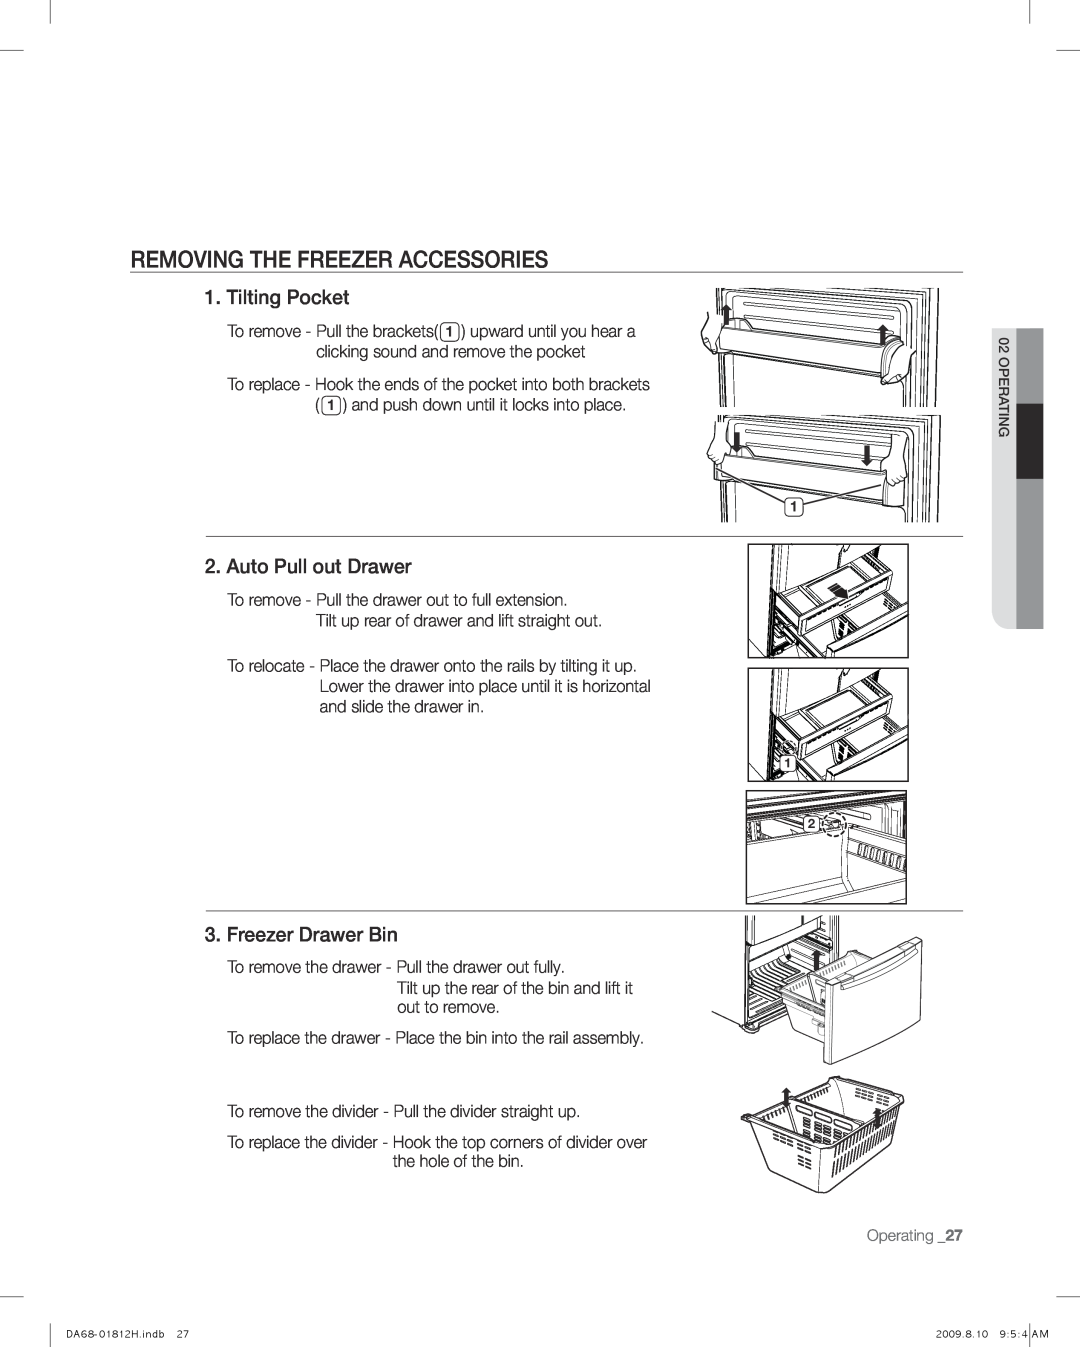 Samsung RF263 user manual Removing The Freezer Accessories, Tilting Pocket, Auto Pull out Drawer, Freezer Drawer Bin 